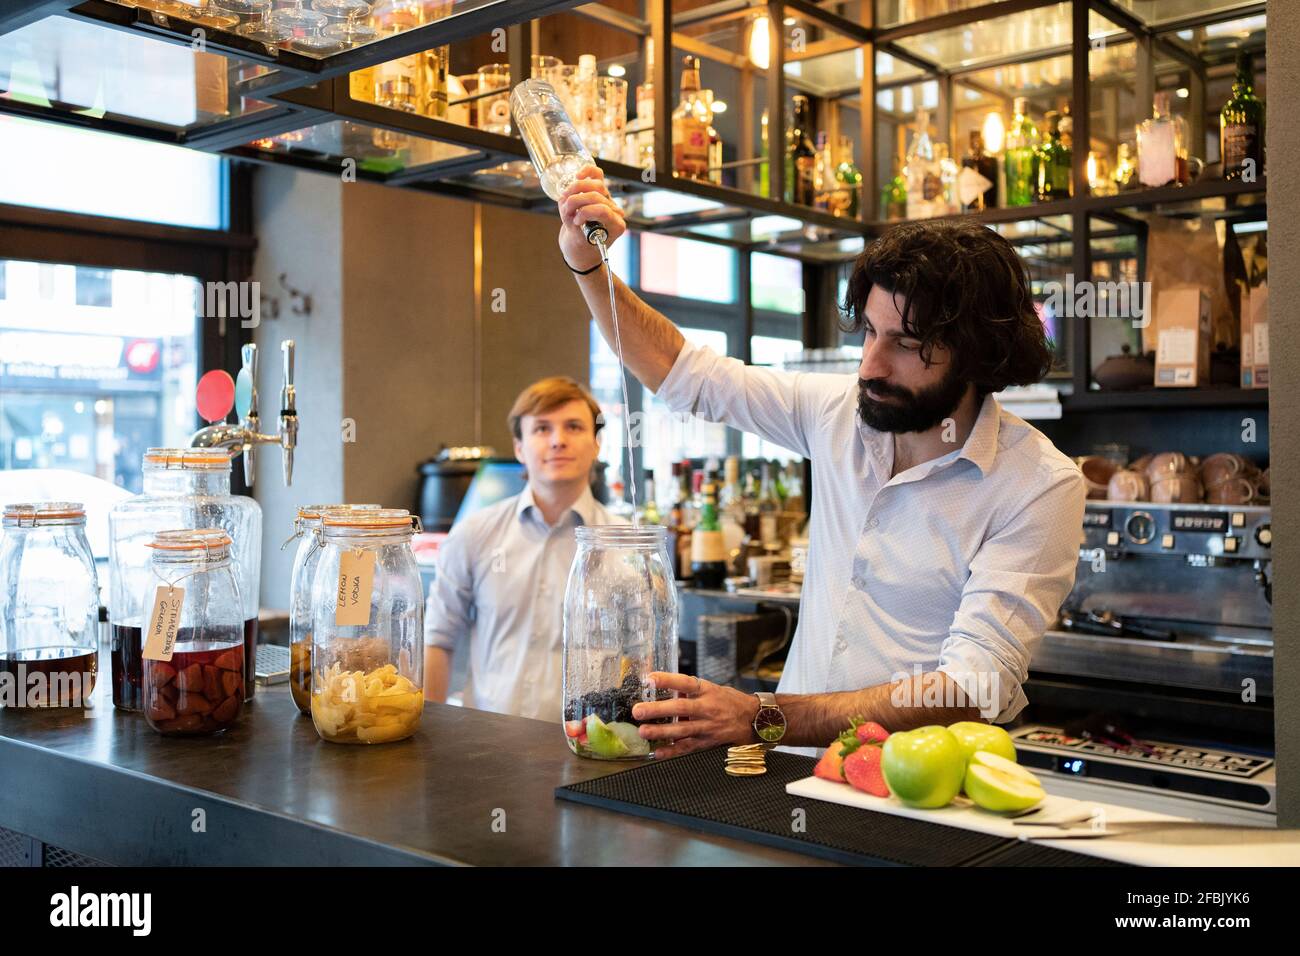 Male bartender pouring alcohol in fruit jar at bar counter Stock Photo